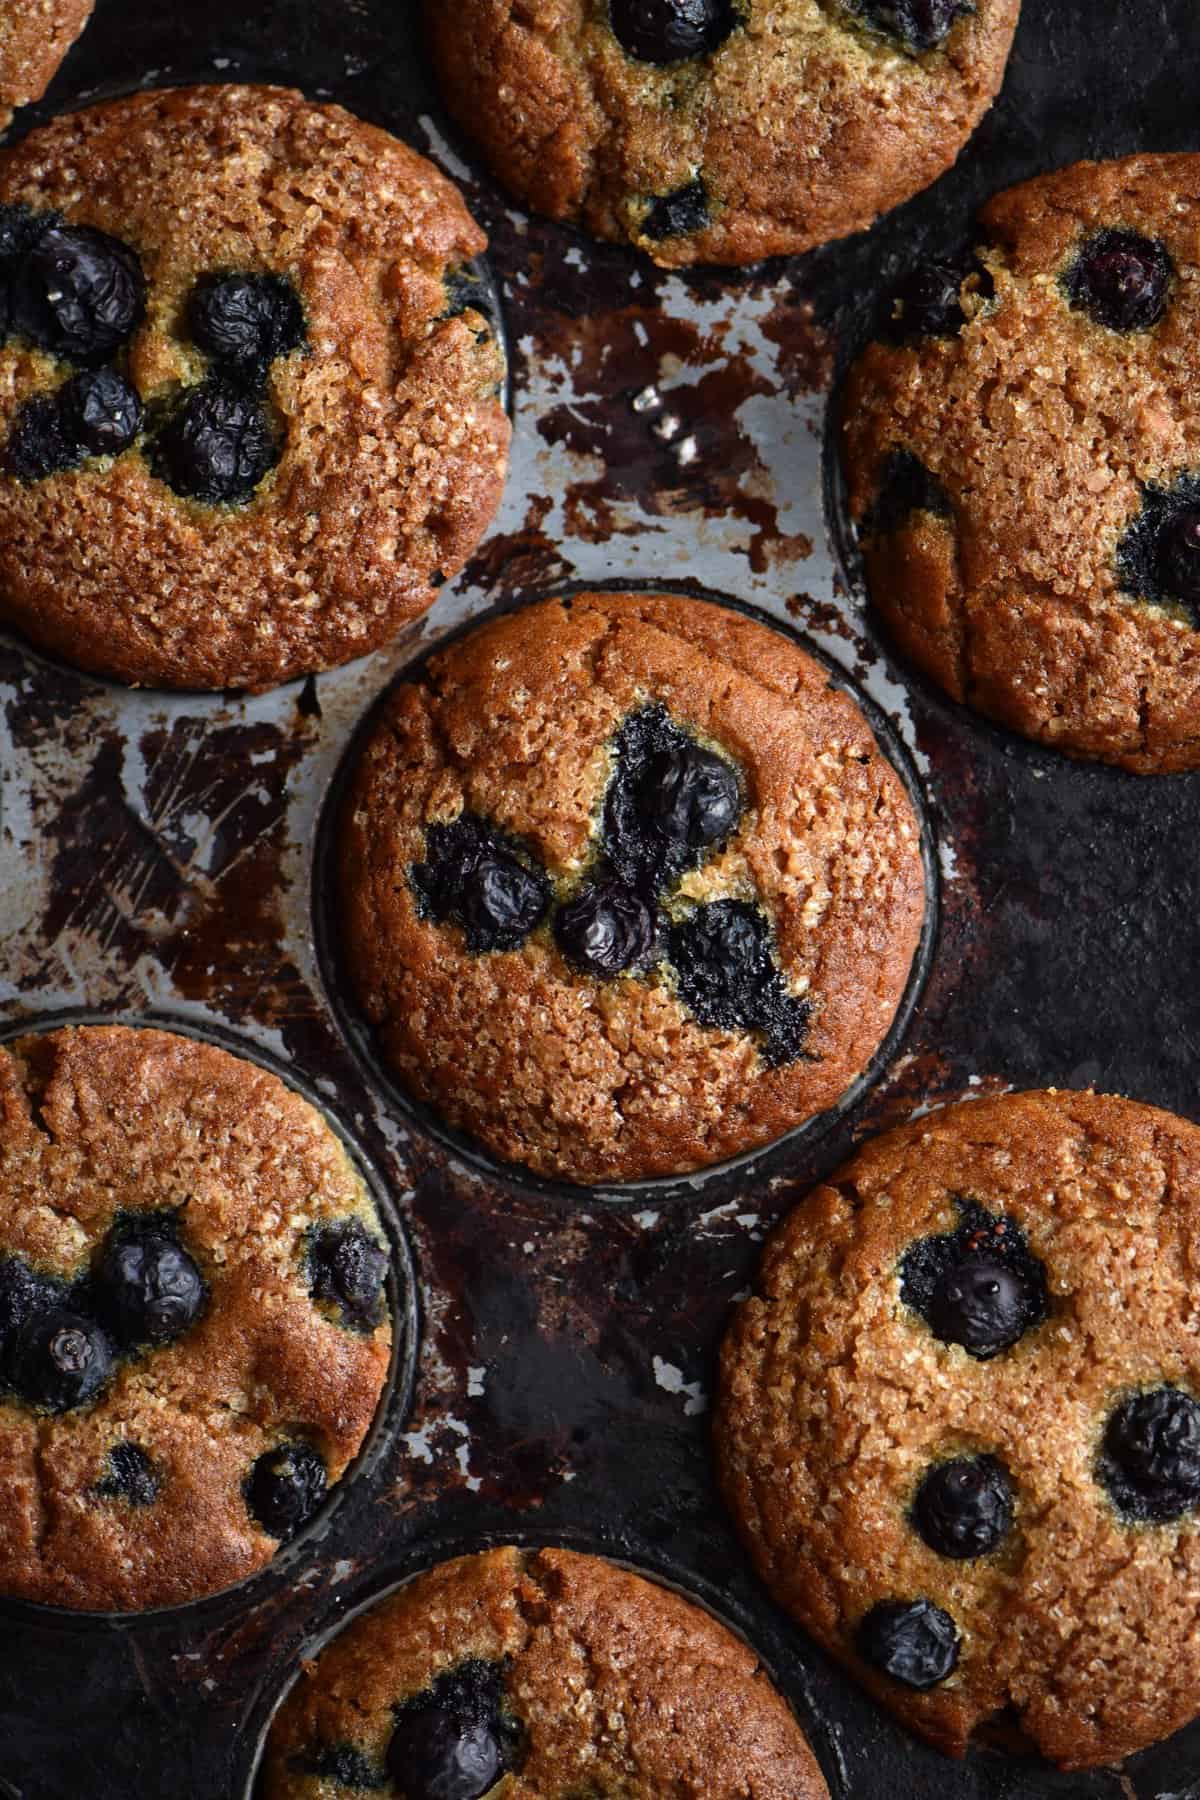 A close up of some vegan, gluten free blueberry muffins in a rustic muffin tray